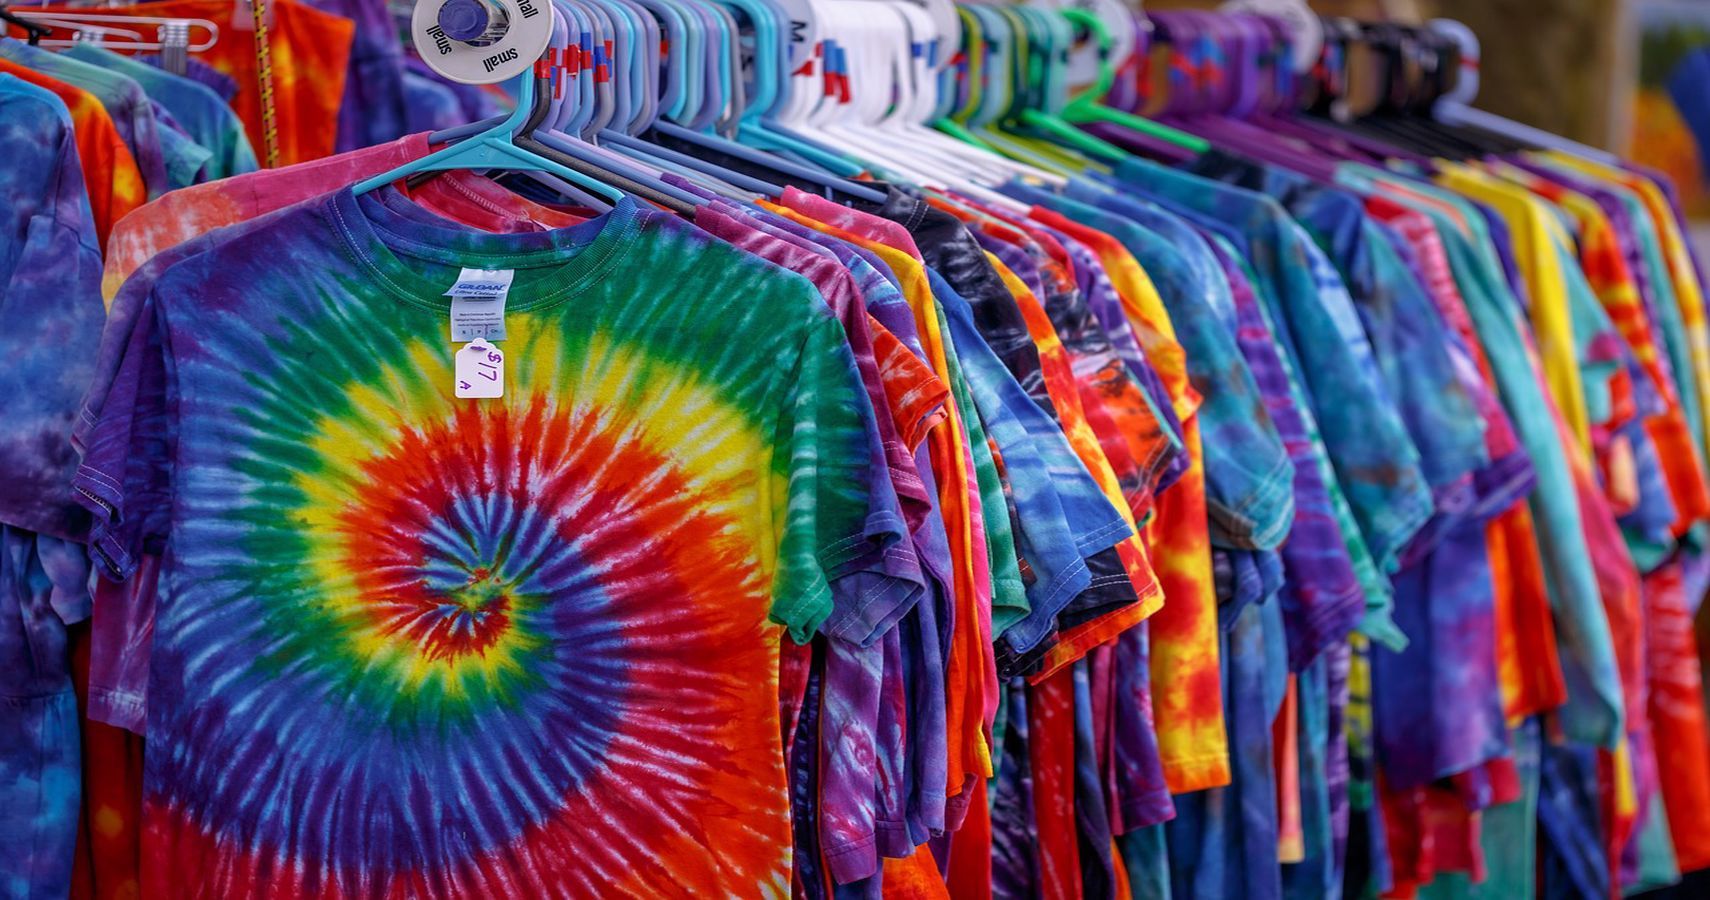 11 Most Expensive Vintage T-Shirts Auctioned | TheRichest